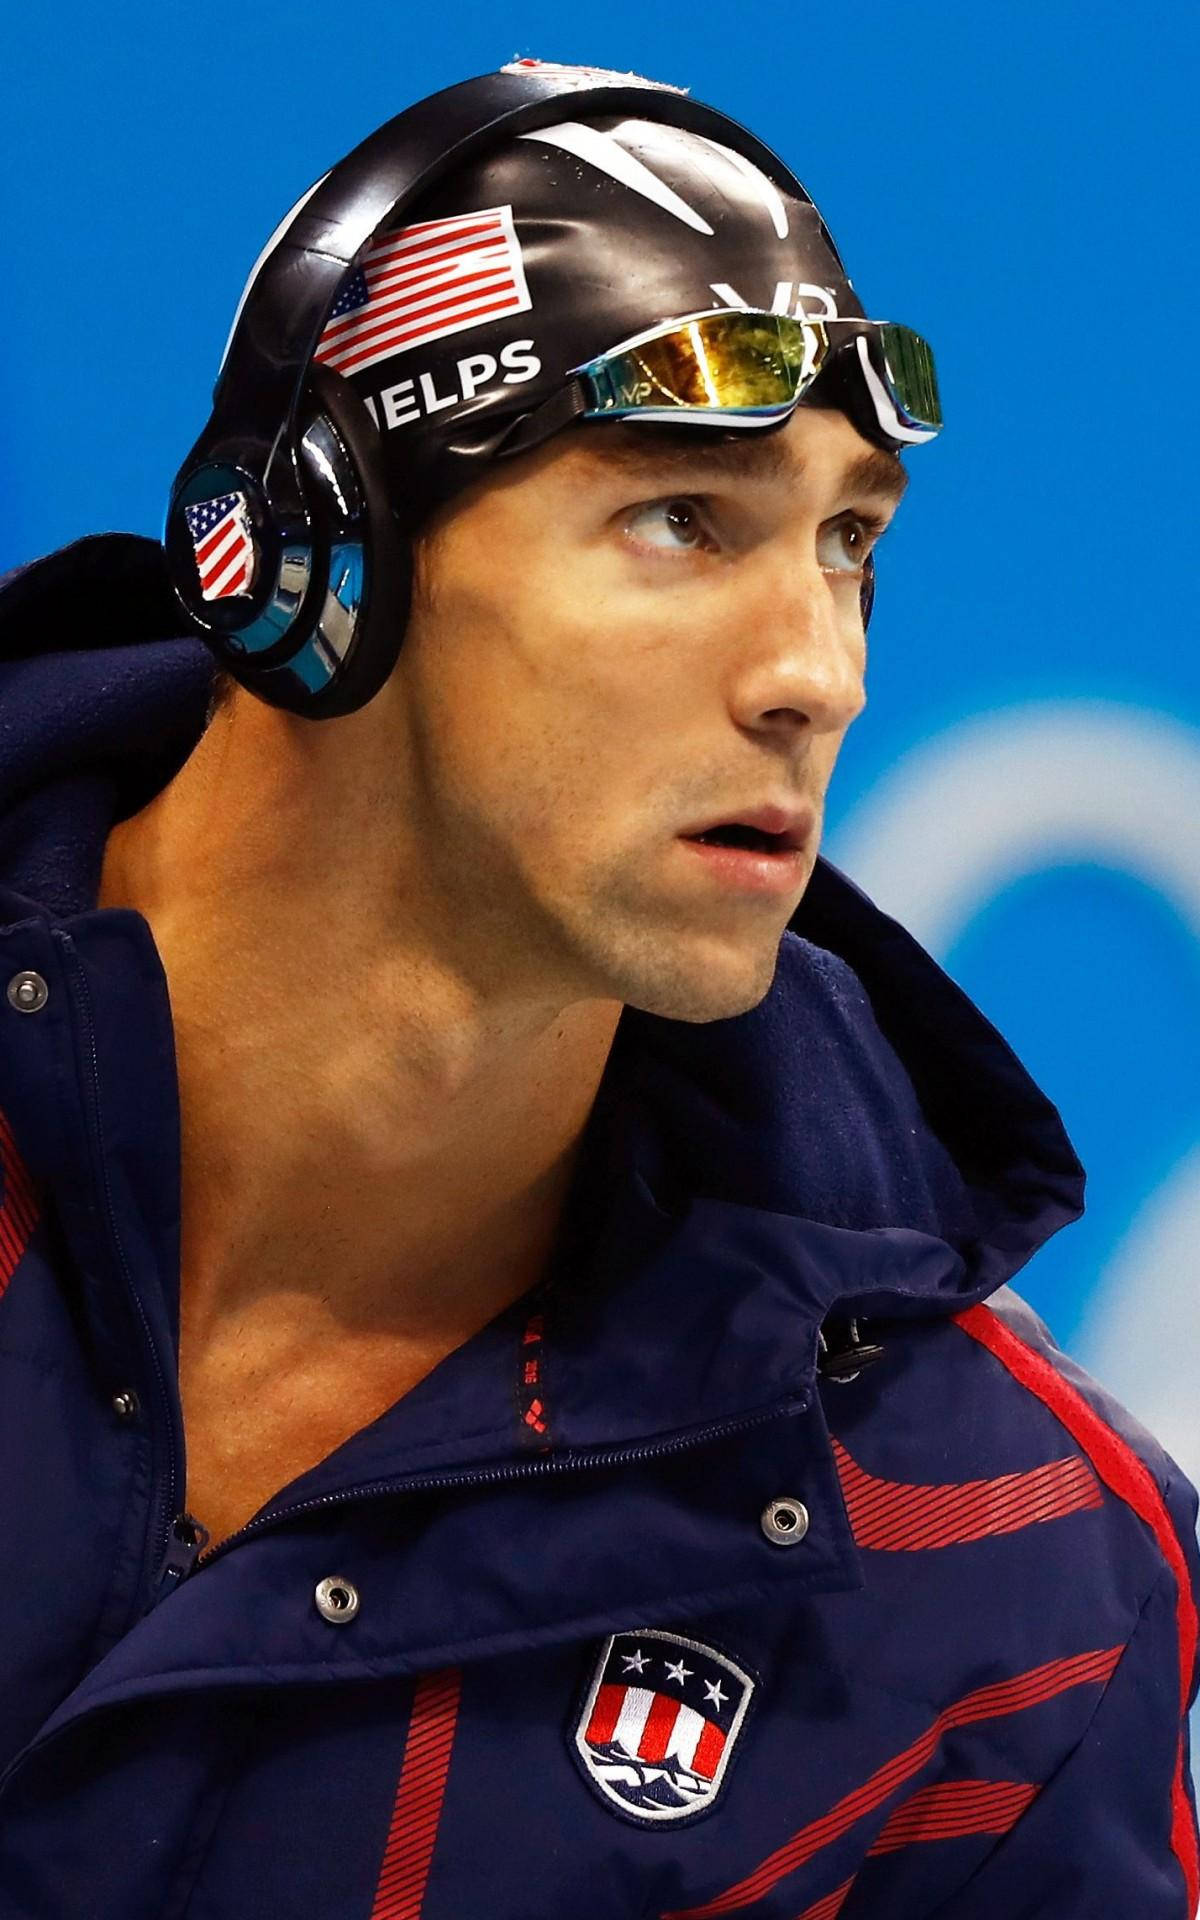 Phelps Pictures Wallpaper